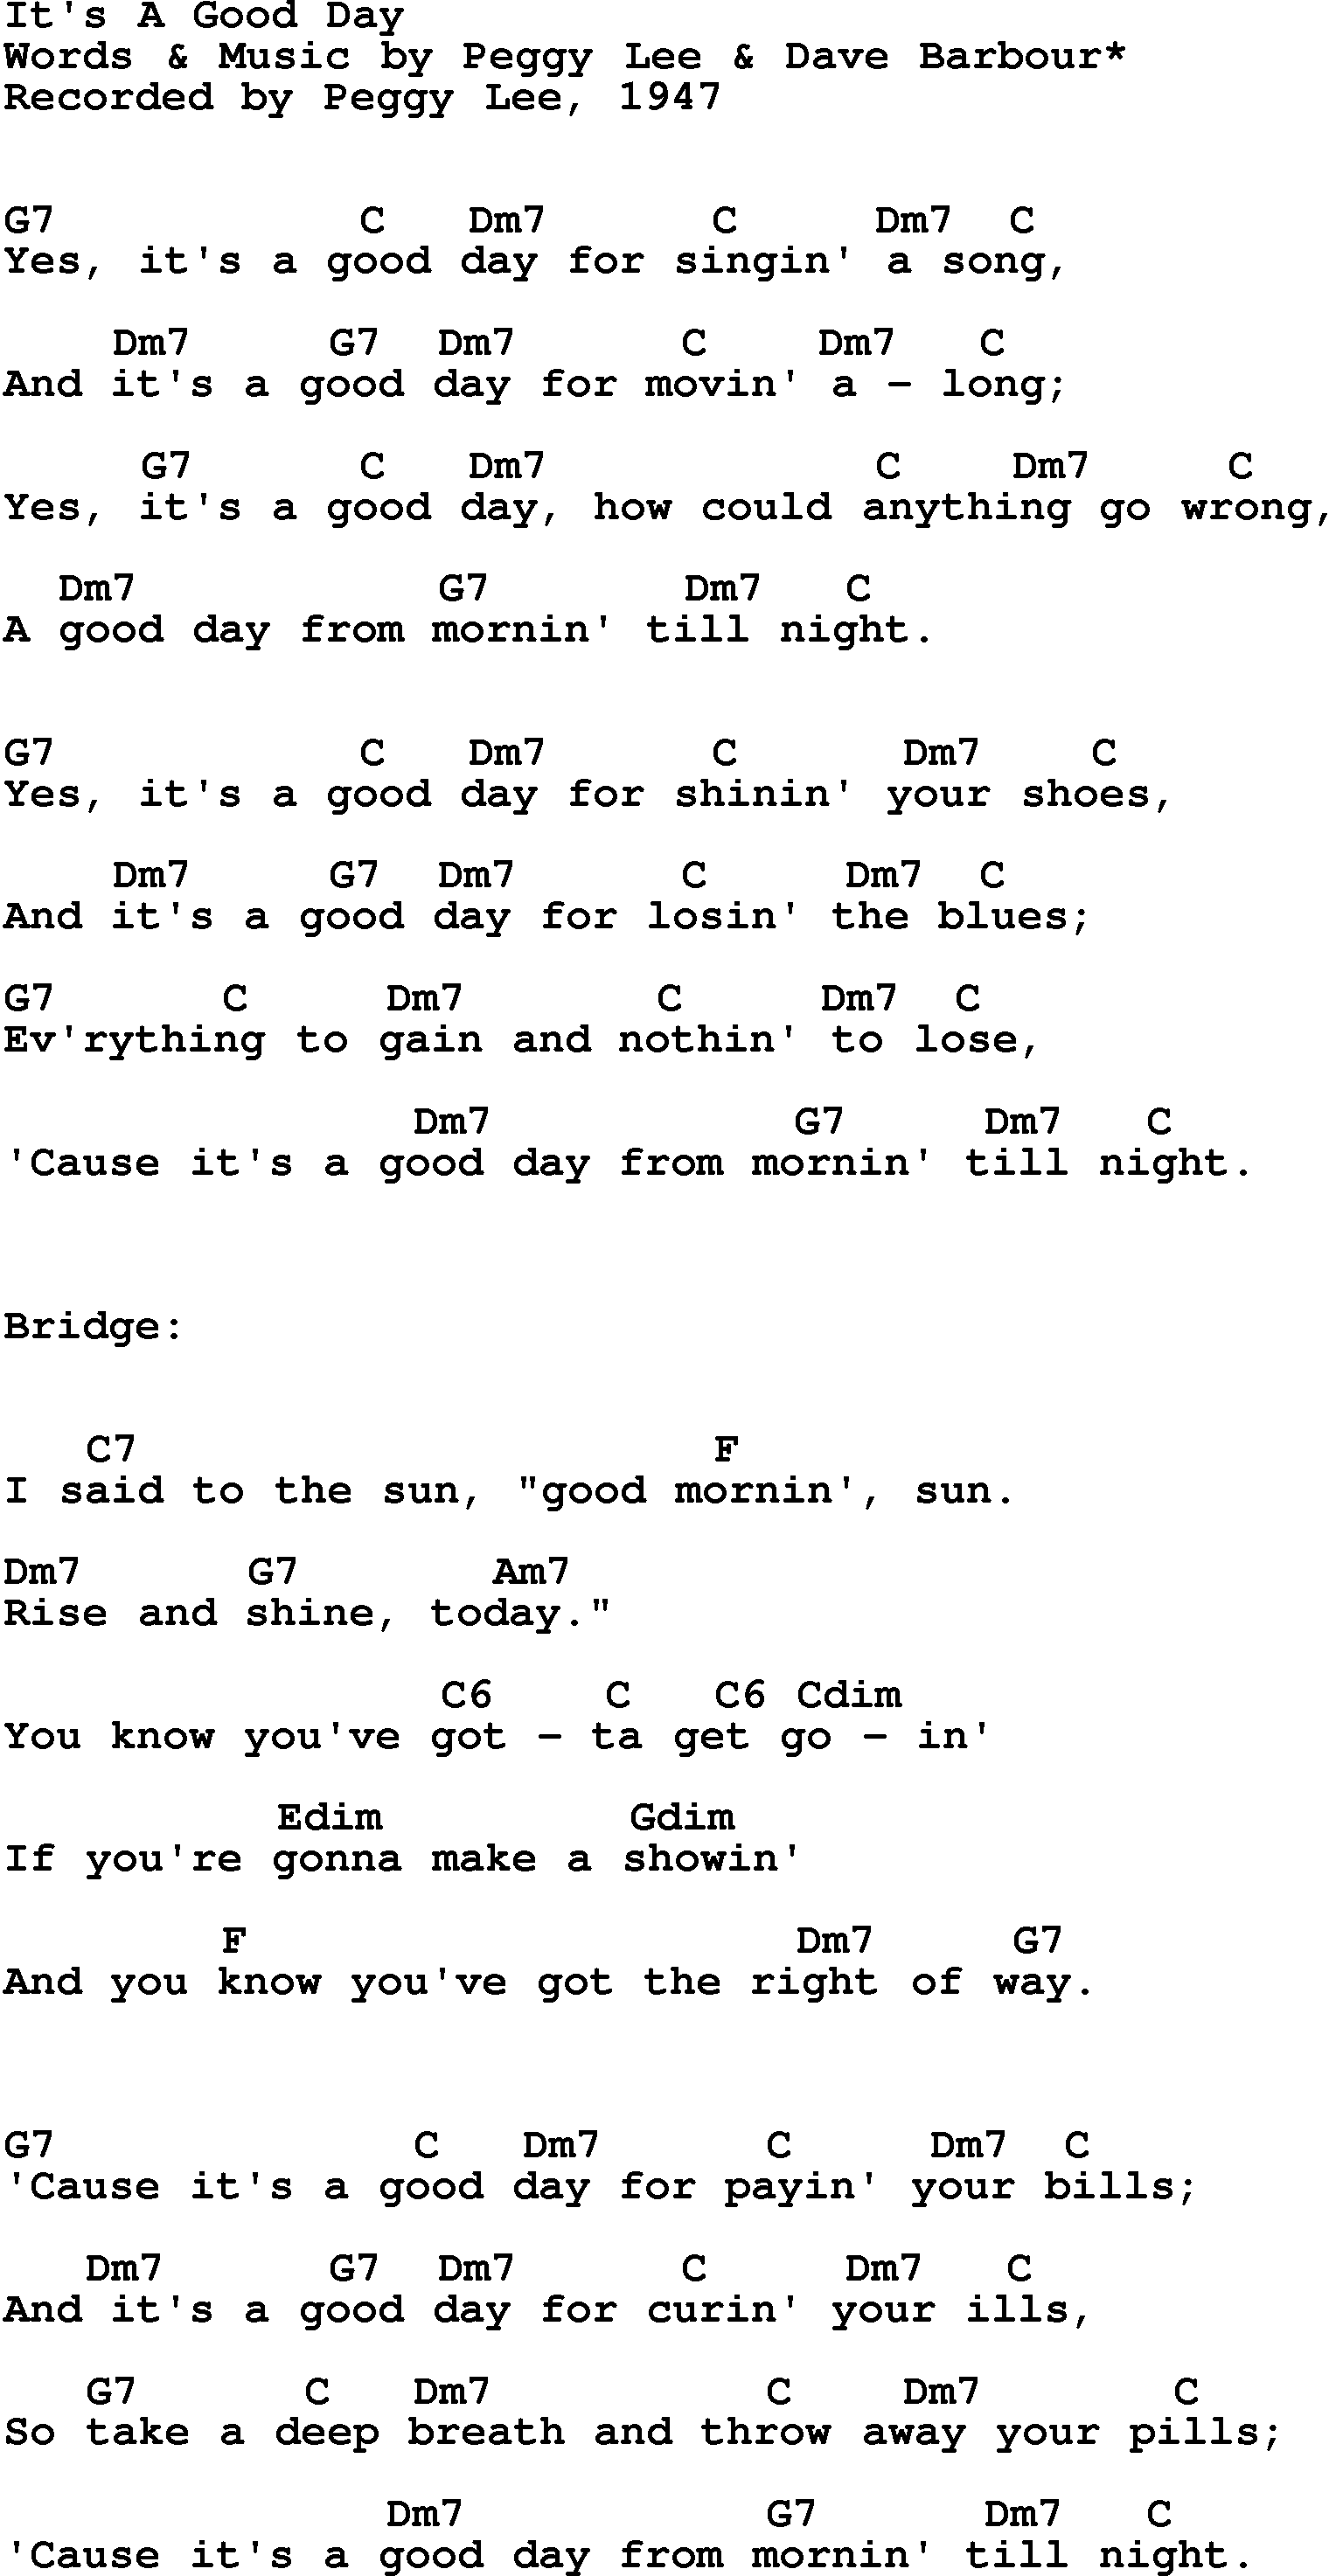 Song Lyrics with guitar chords for It's A Good Day - Peggy Lee, 1947